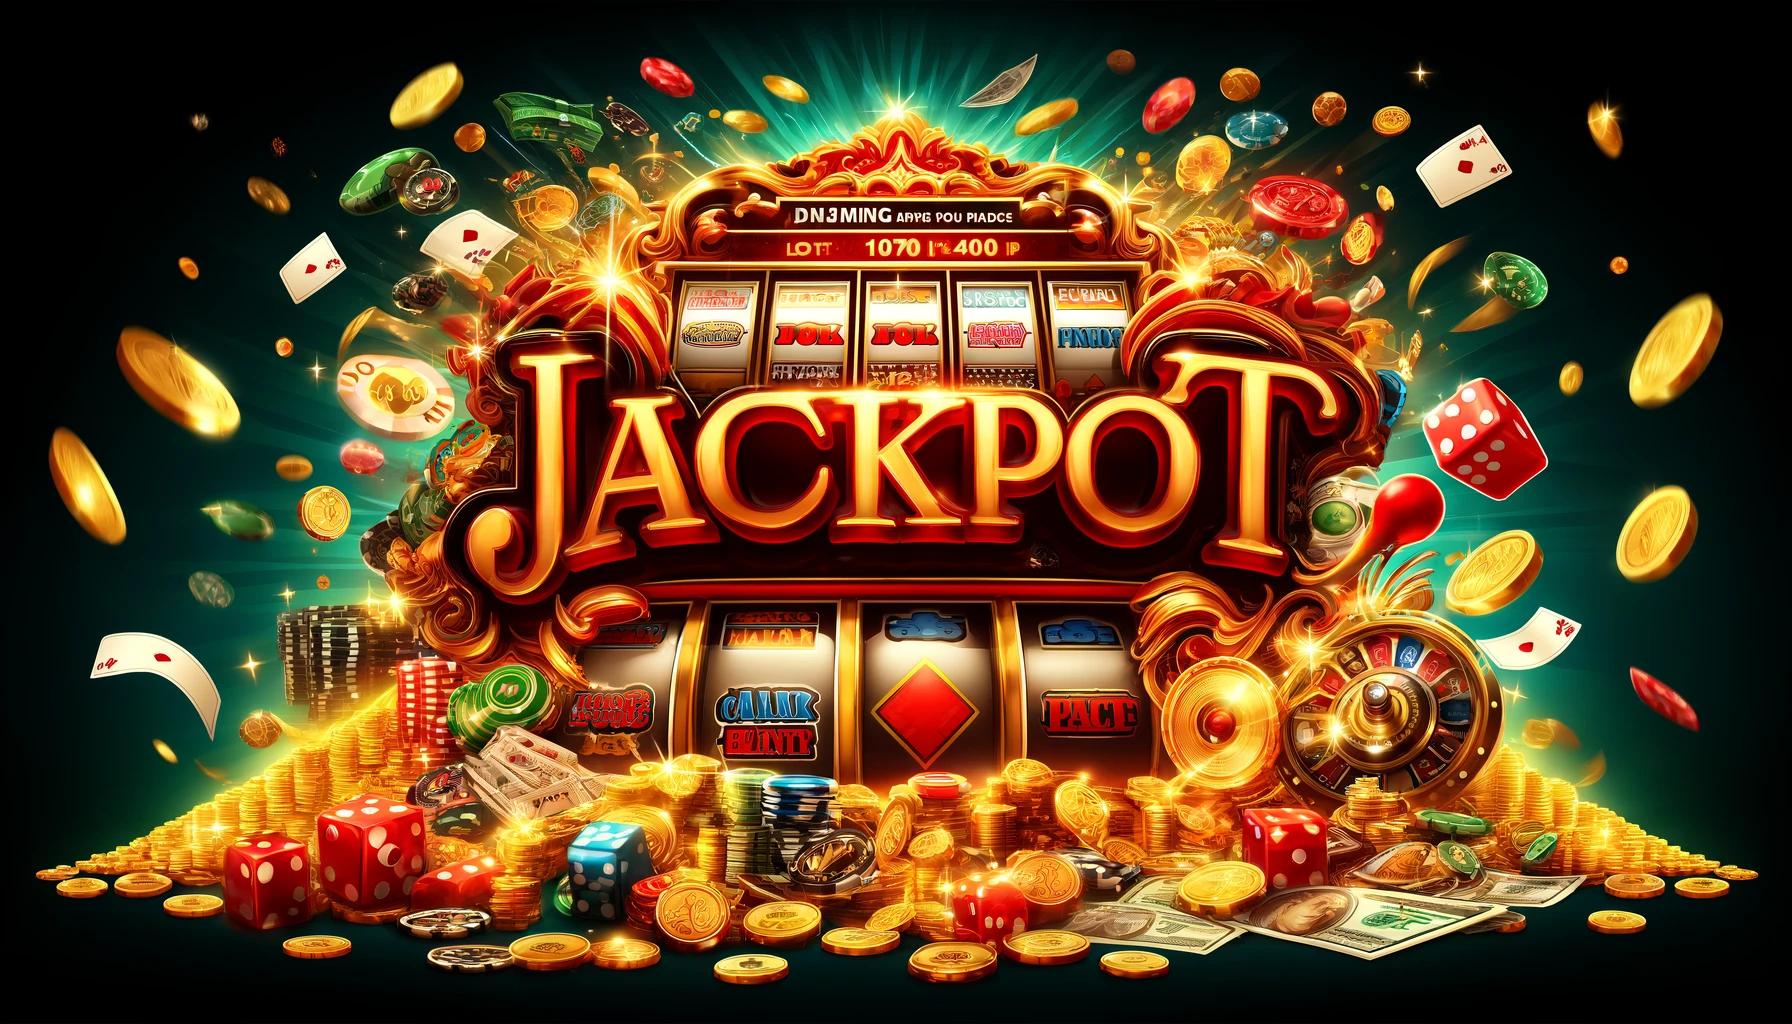 DALL·E 2024 04 10 15.52.51 Design a wide banner for a jackpot page dimensions 1900x400 pixels with a vivid casino theme. The word Jackpot should be prominently displayed in